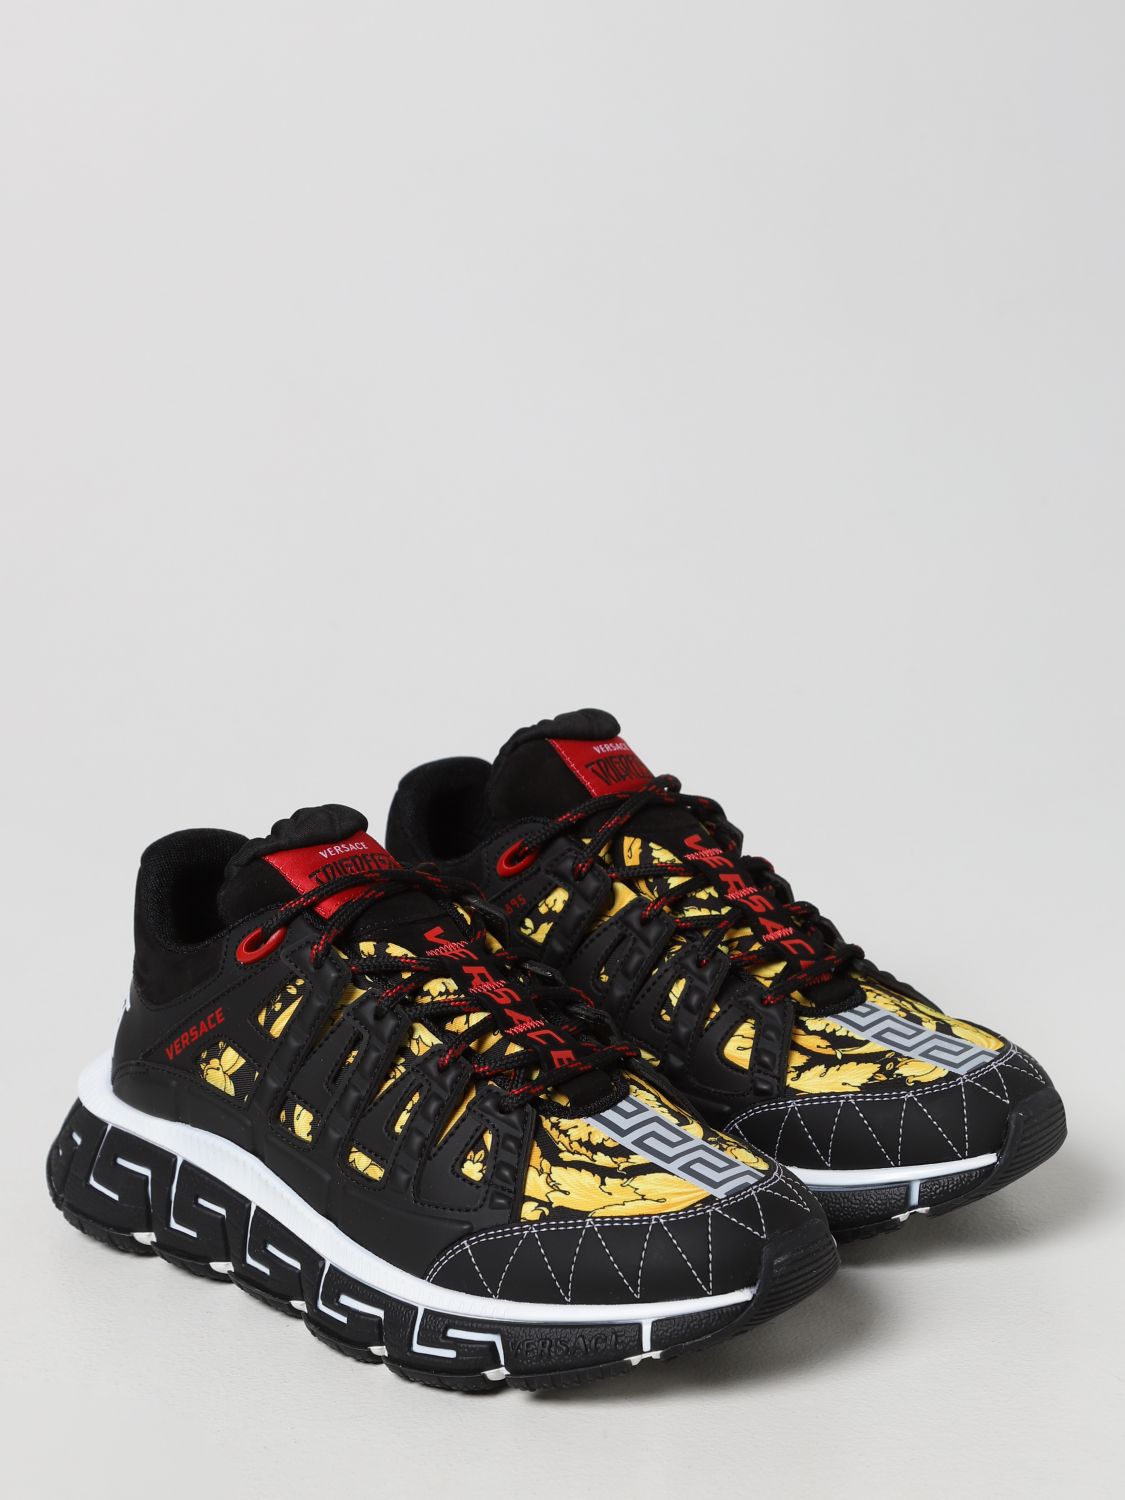 VERSACE: Trigreca trainers with Baroque pattern - Black | Trainers ...